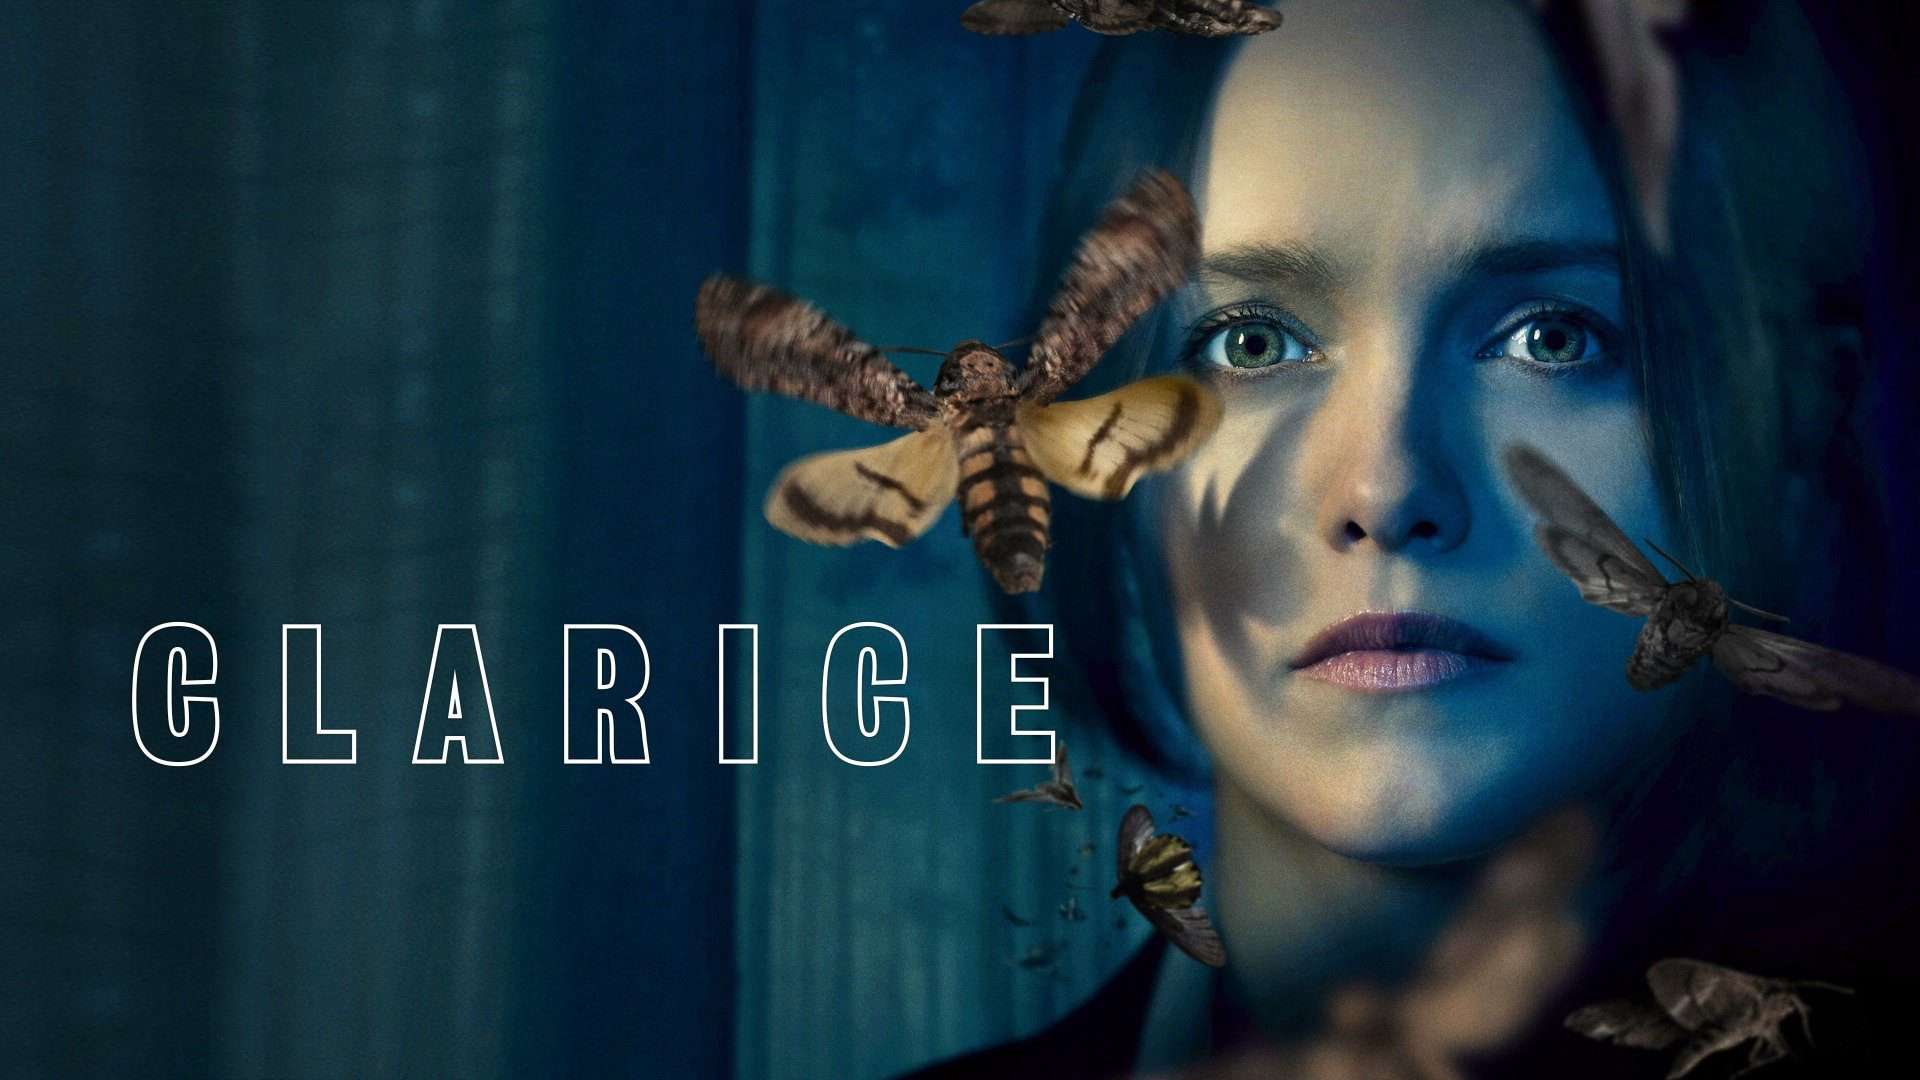 Clarice Poster HD